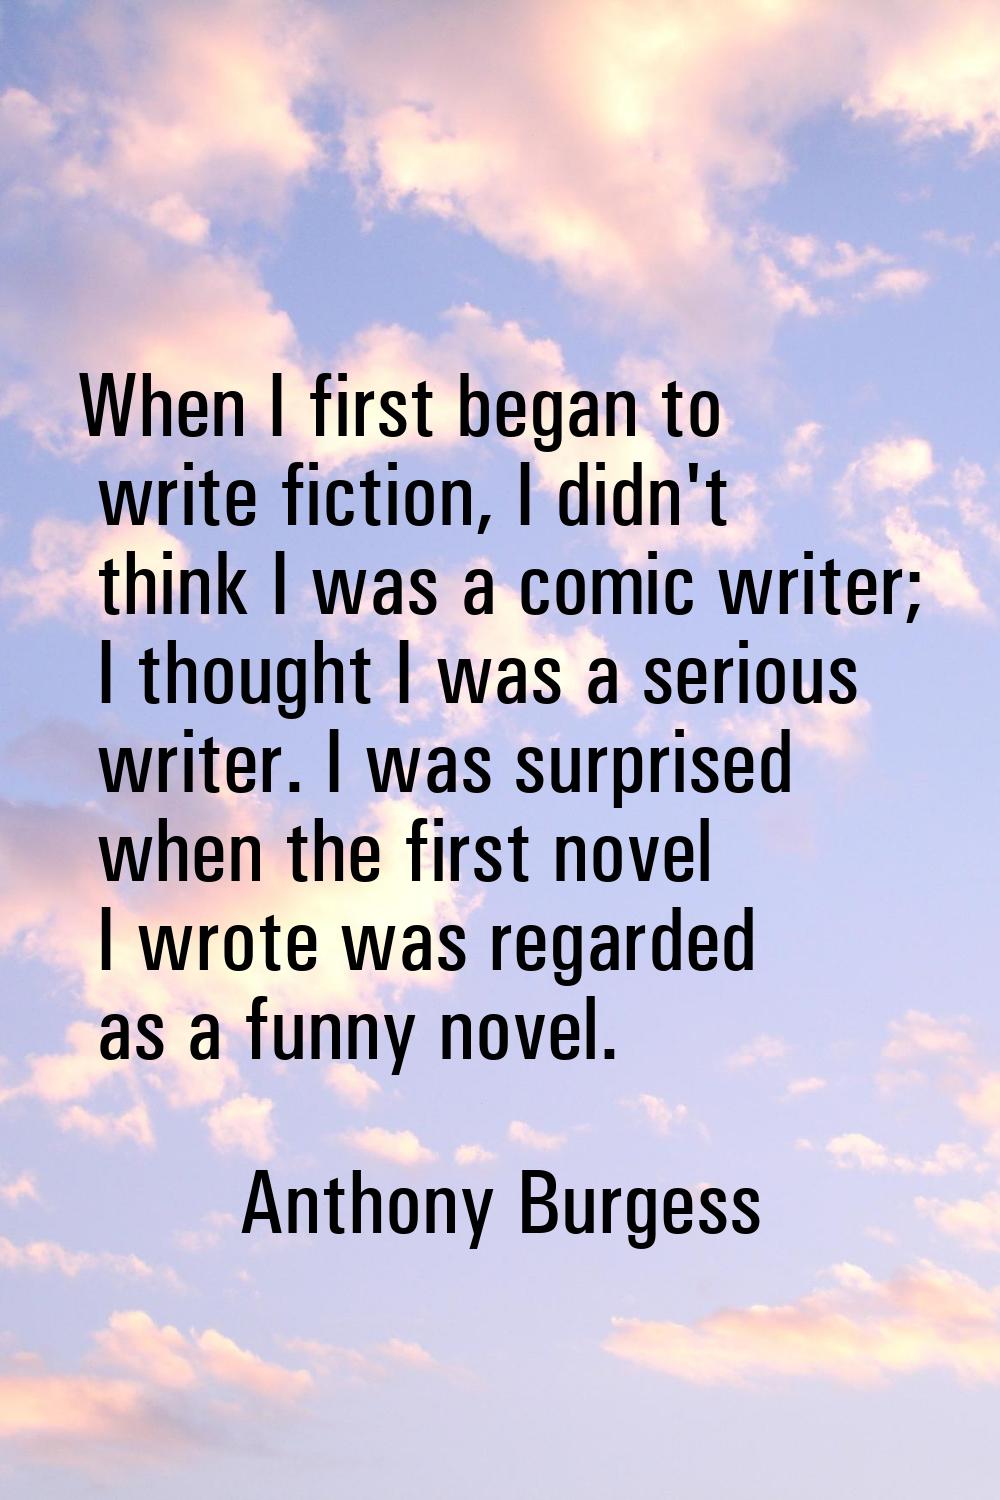 When I first began to write fiction, I didn't think I was a comic writer; I thought I was a serious